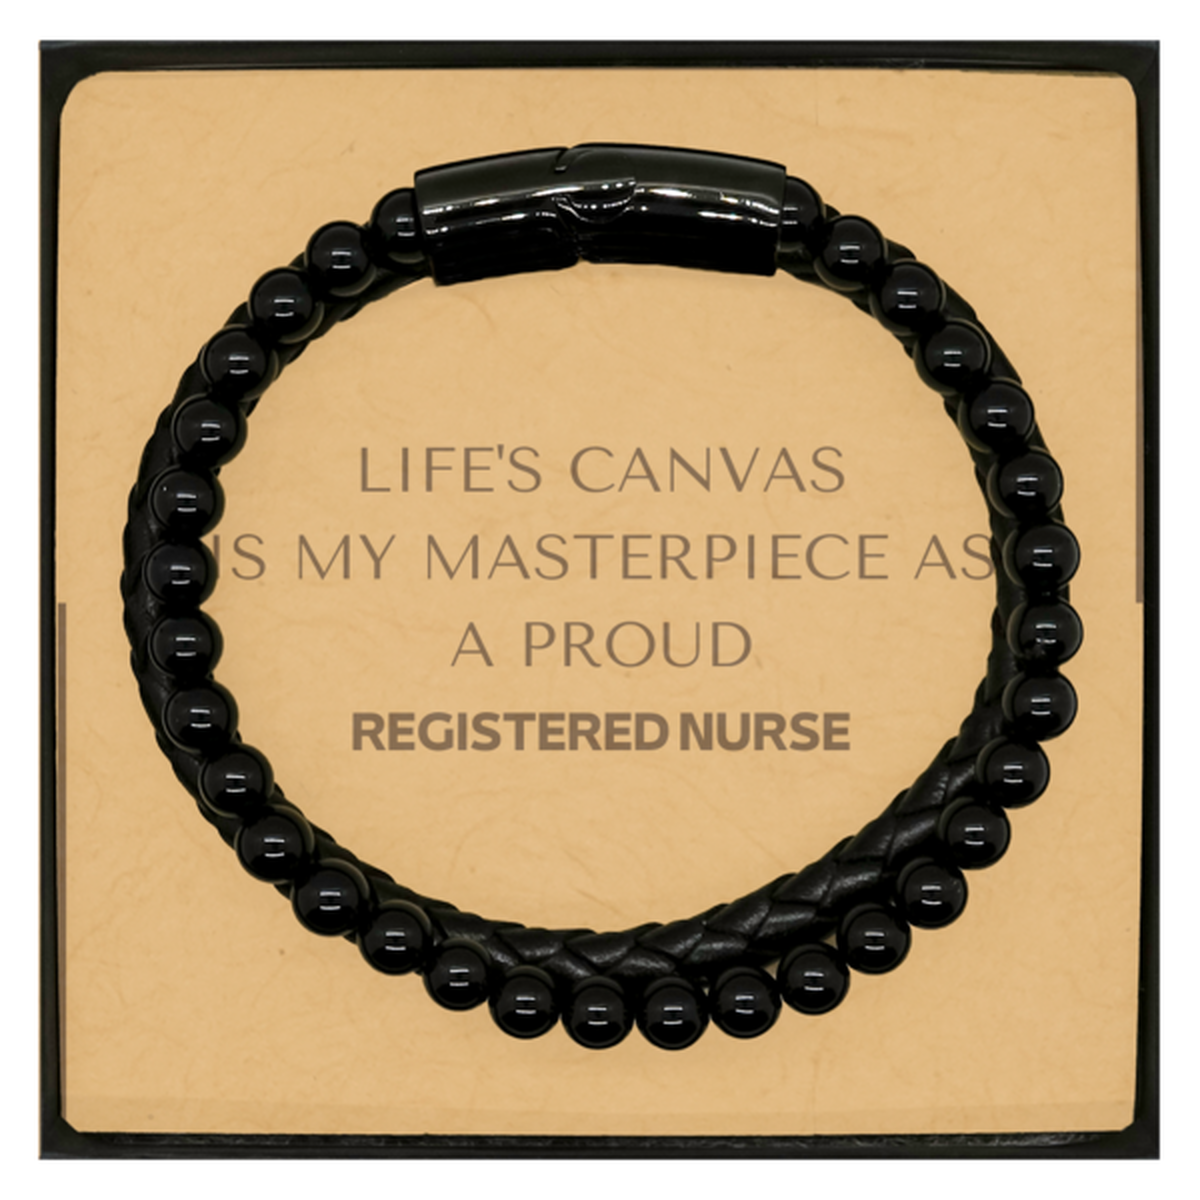 Proud Registered Nurse Gifts, Life's canvas is my masterpiece, Epic Birthday Christmas Unique Stone Leather Bracelets For Registered Nurse, Coworkers, Men, Women, Friends